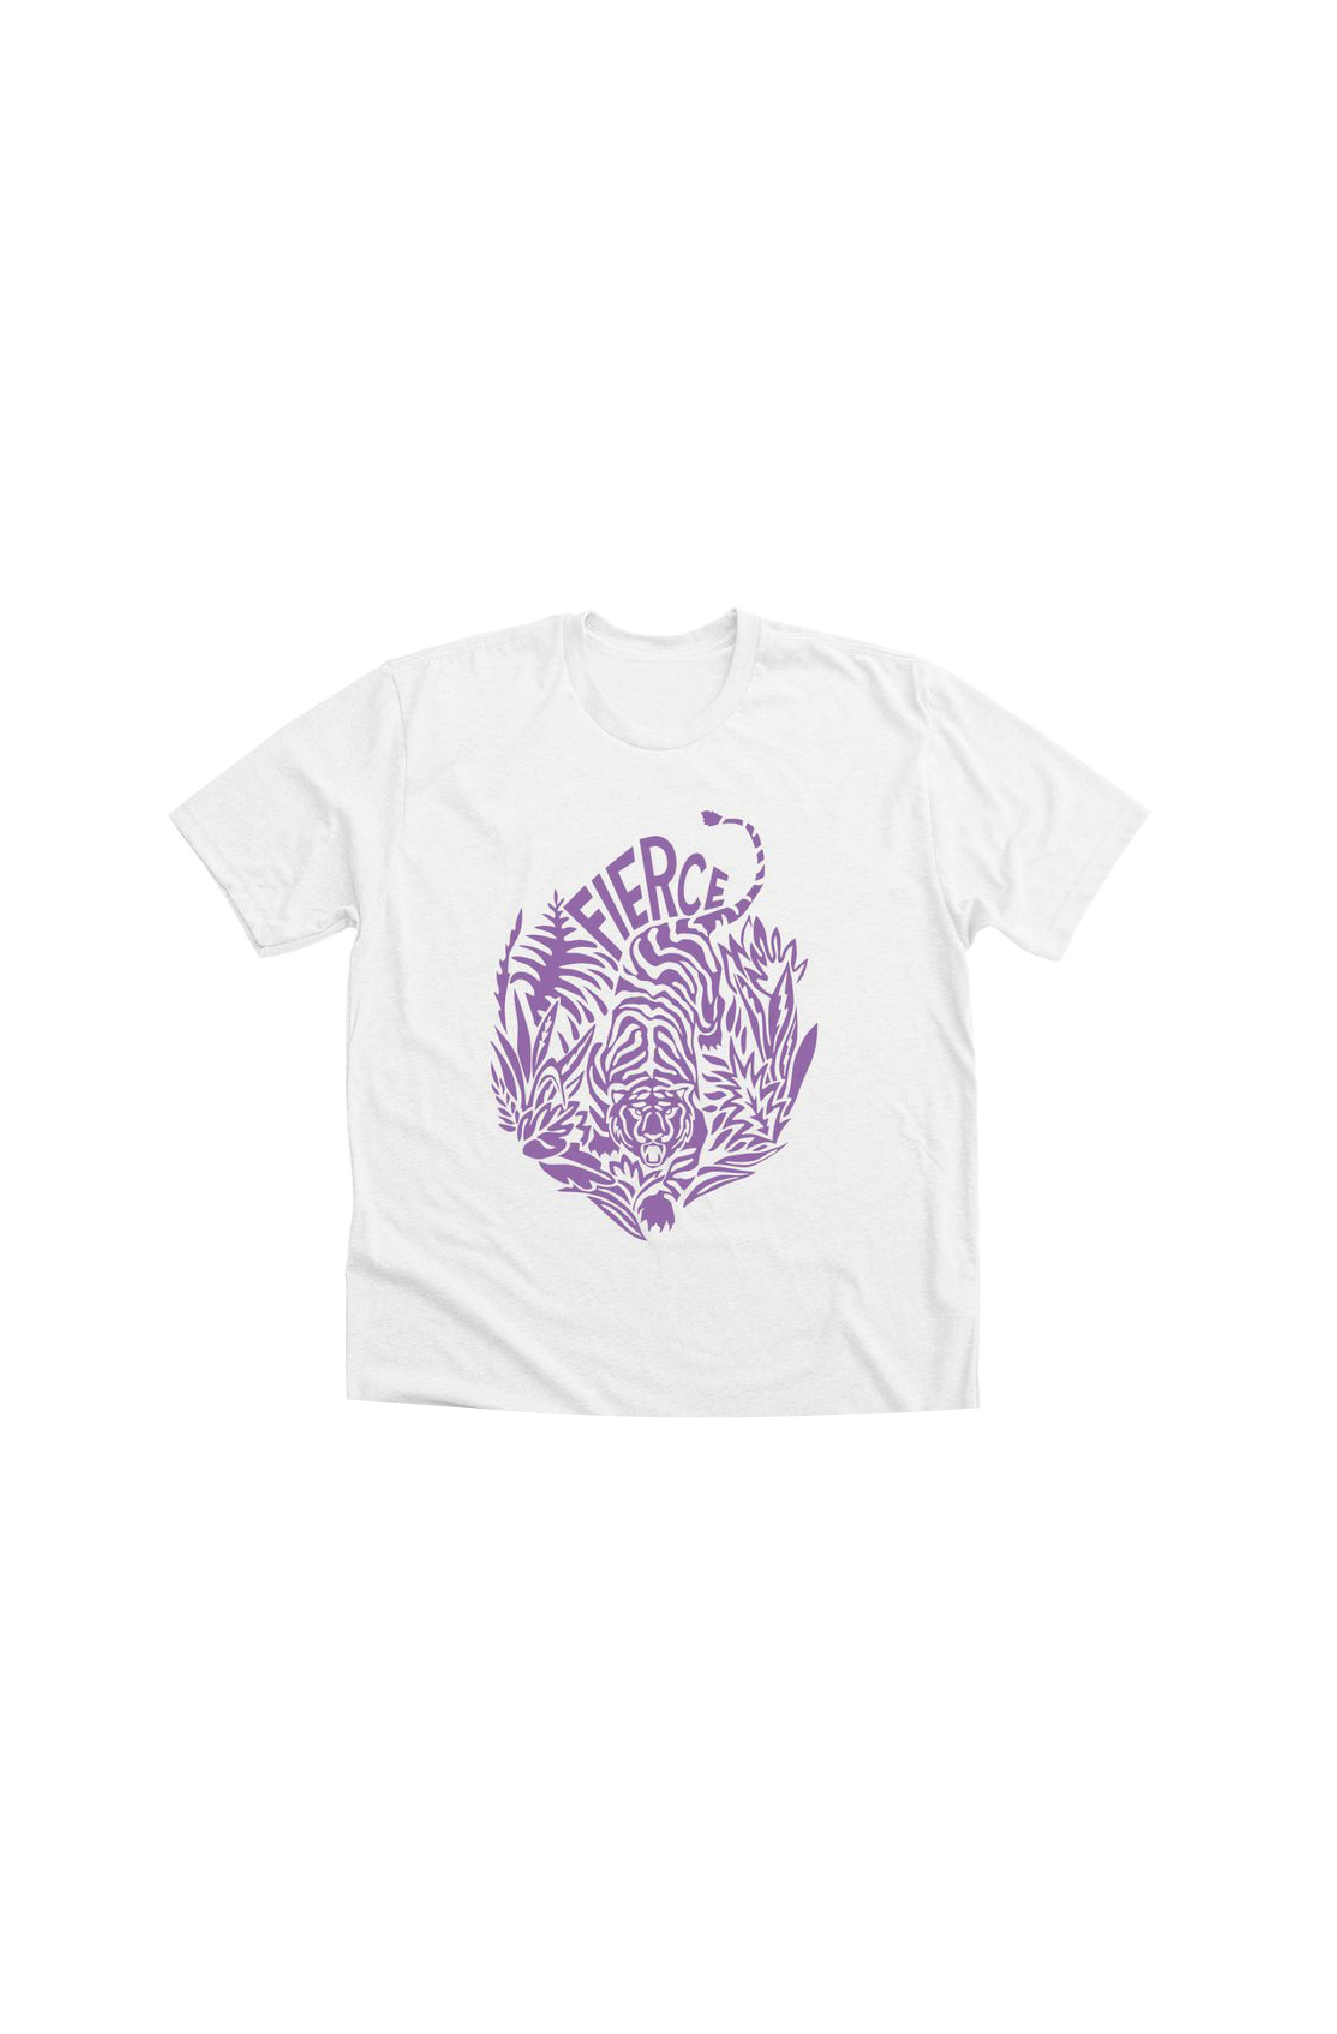 White crop top with a tiger printed on the front in colour lilac